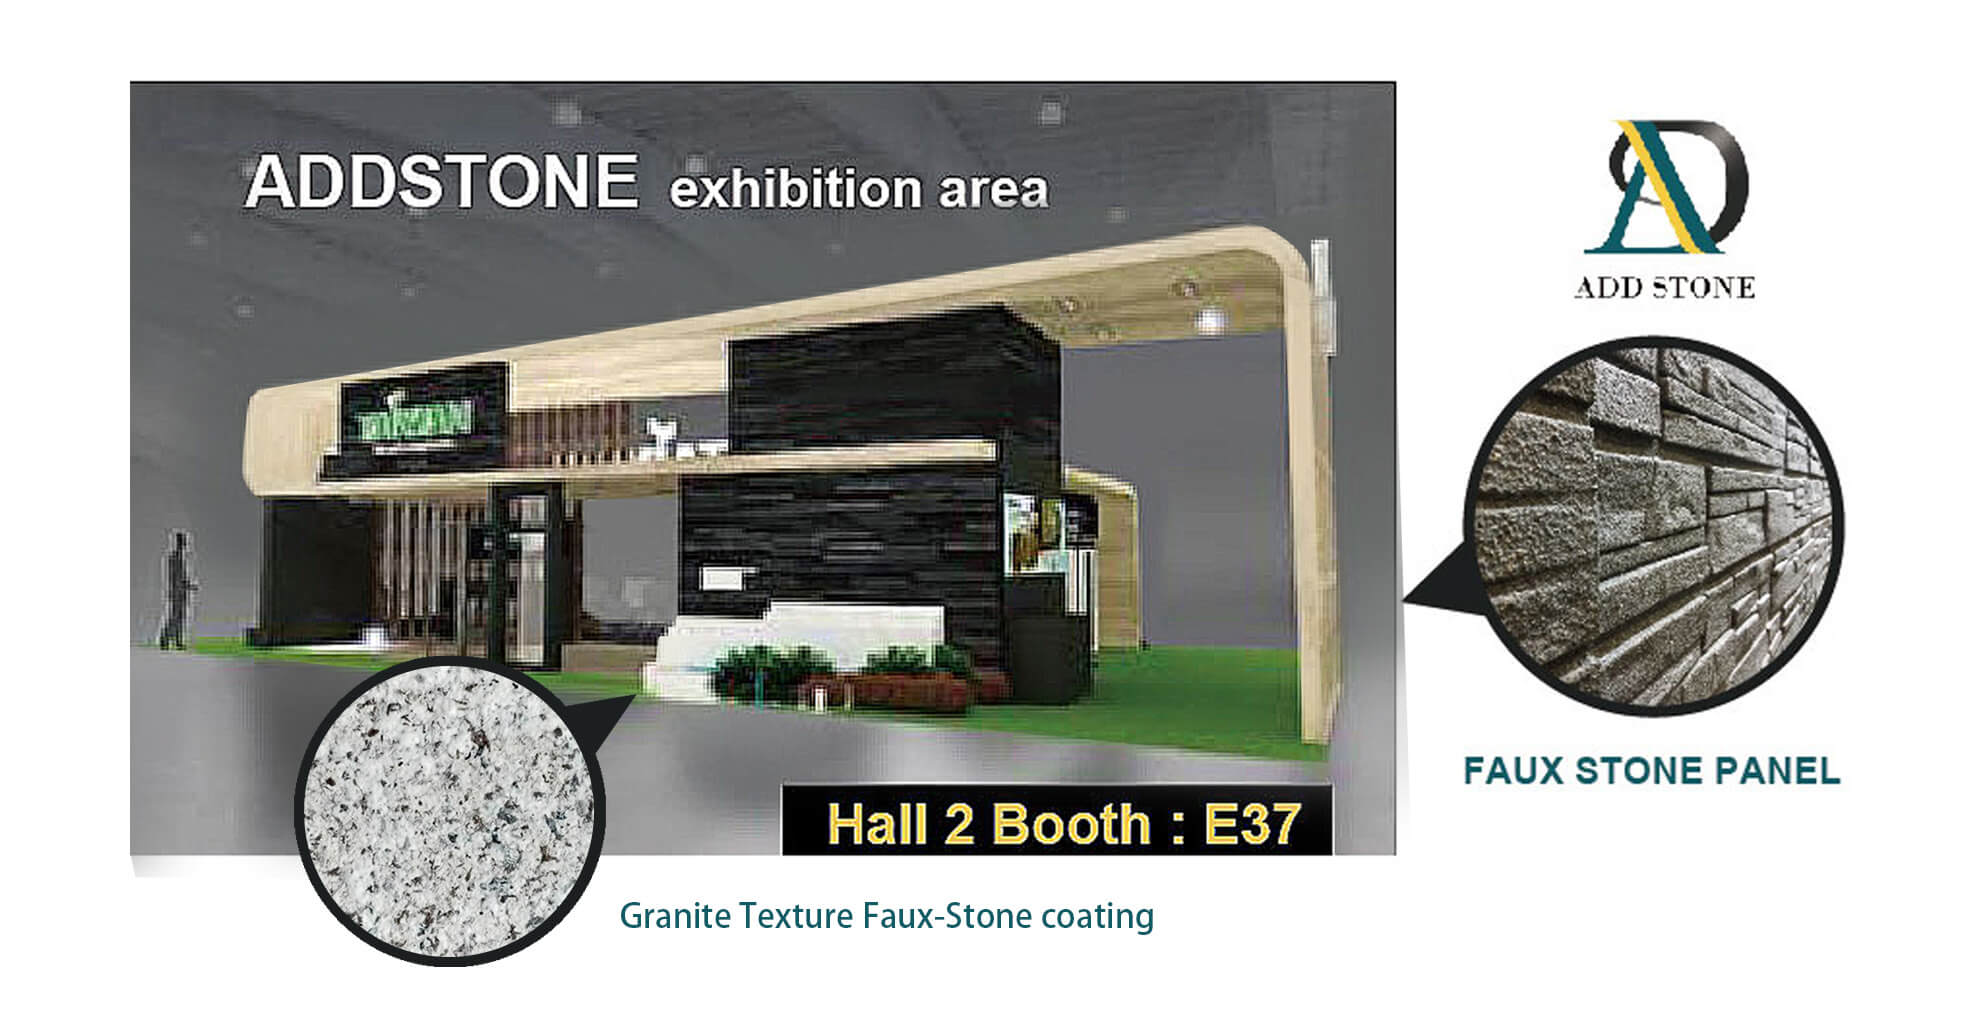 ADD STONE exhibited Granite Texture Faux-Stone Coating and Faux-Stone Wall Panel at Project Qatar 2019, Hall 2 Booth:E27